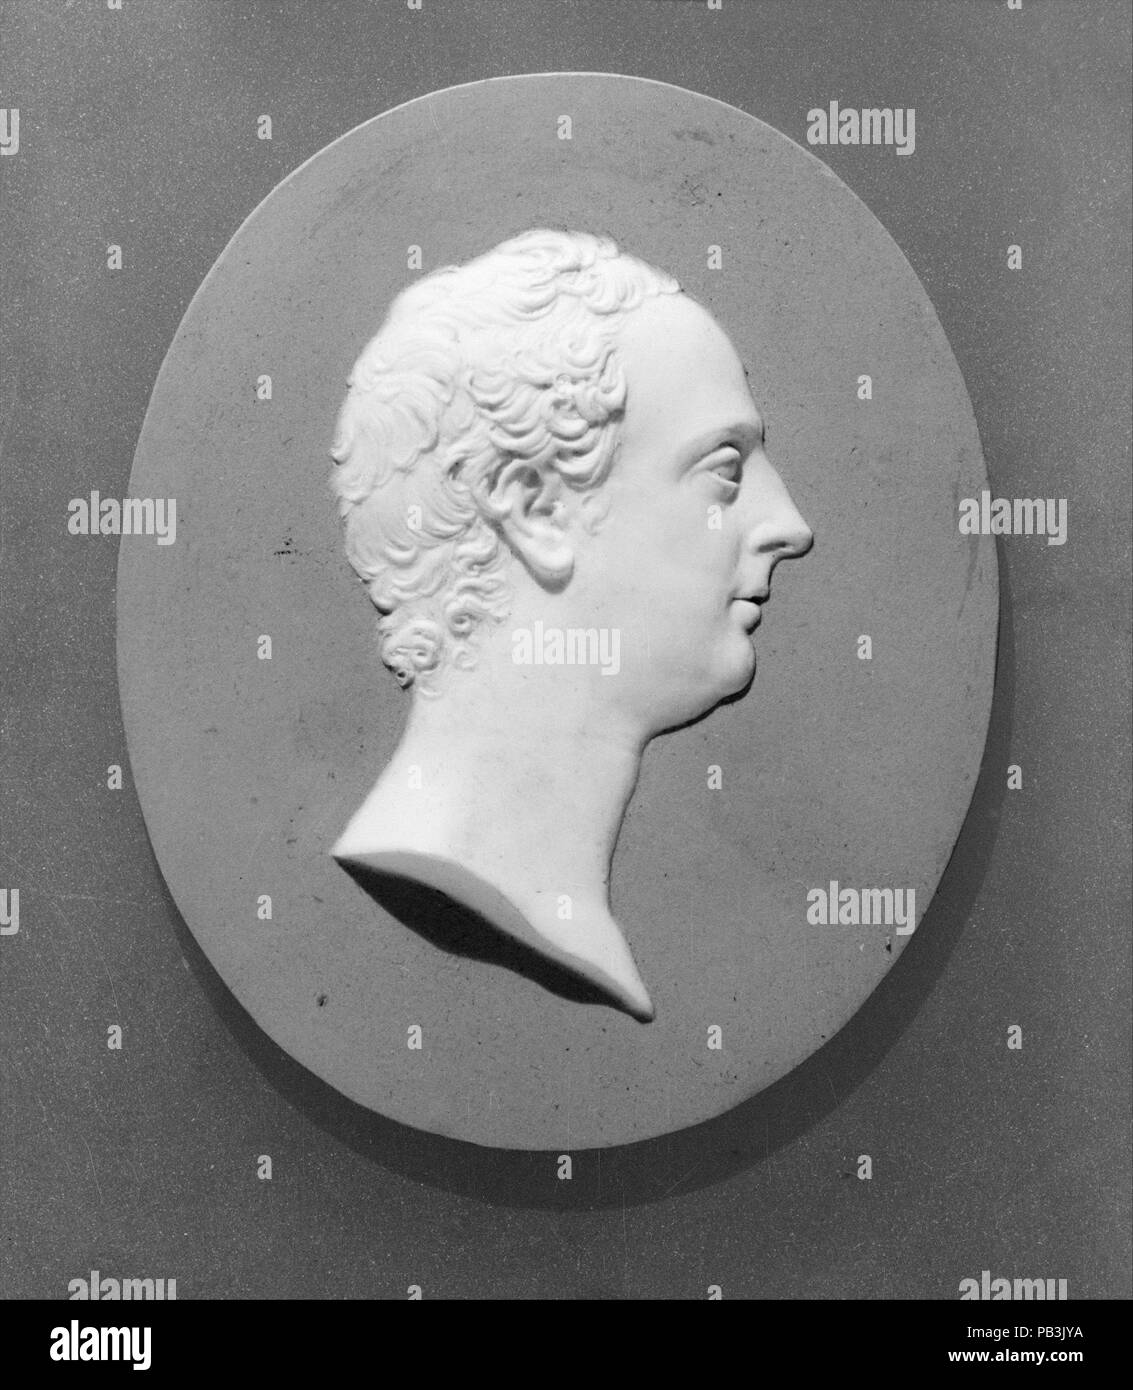 Thomas Pitt, Lord Camelford. Culture: British, Etruria, Staffordshire. Dimensions: 3 1/4 × 2 5/8 in. (8.3 × 6.7 cm). Maker: Wedgwood and Bentley (1760-80). Date: ca. 1780. Museum: Metropolitan Museum of Art, New York, USA. Stock Photo